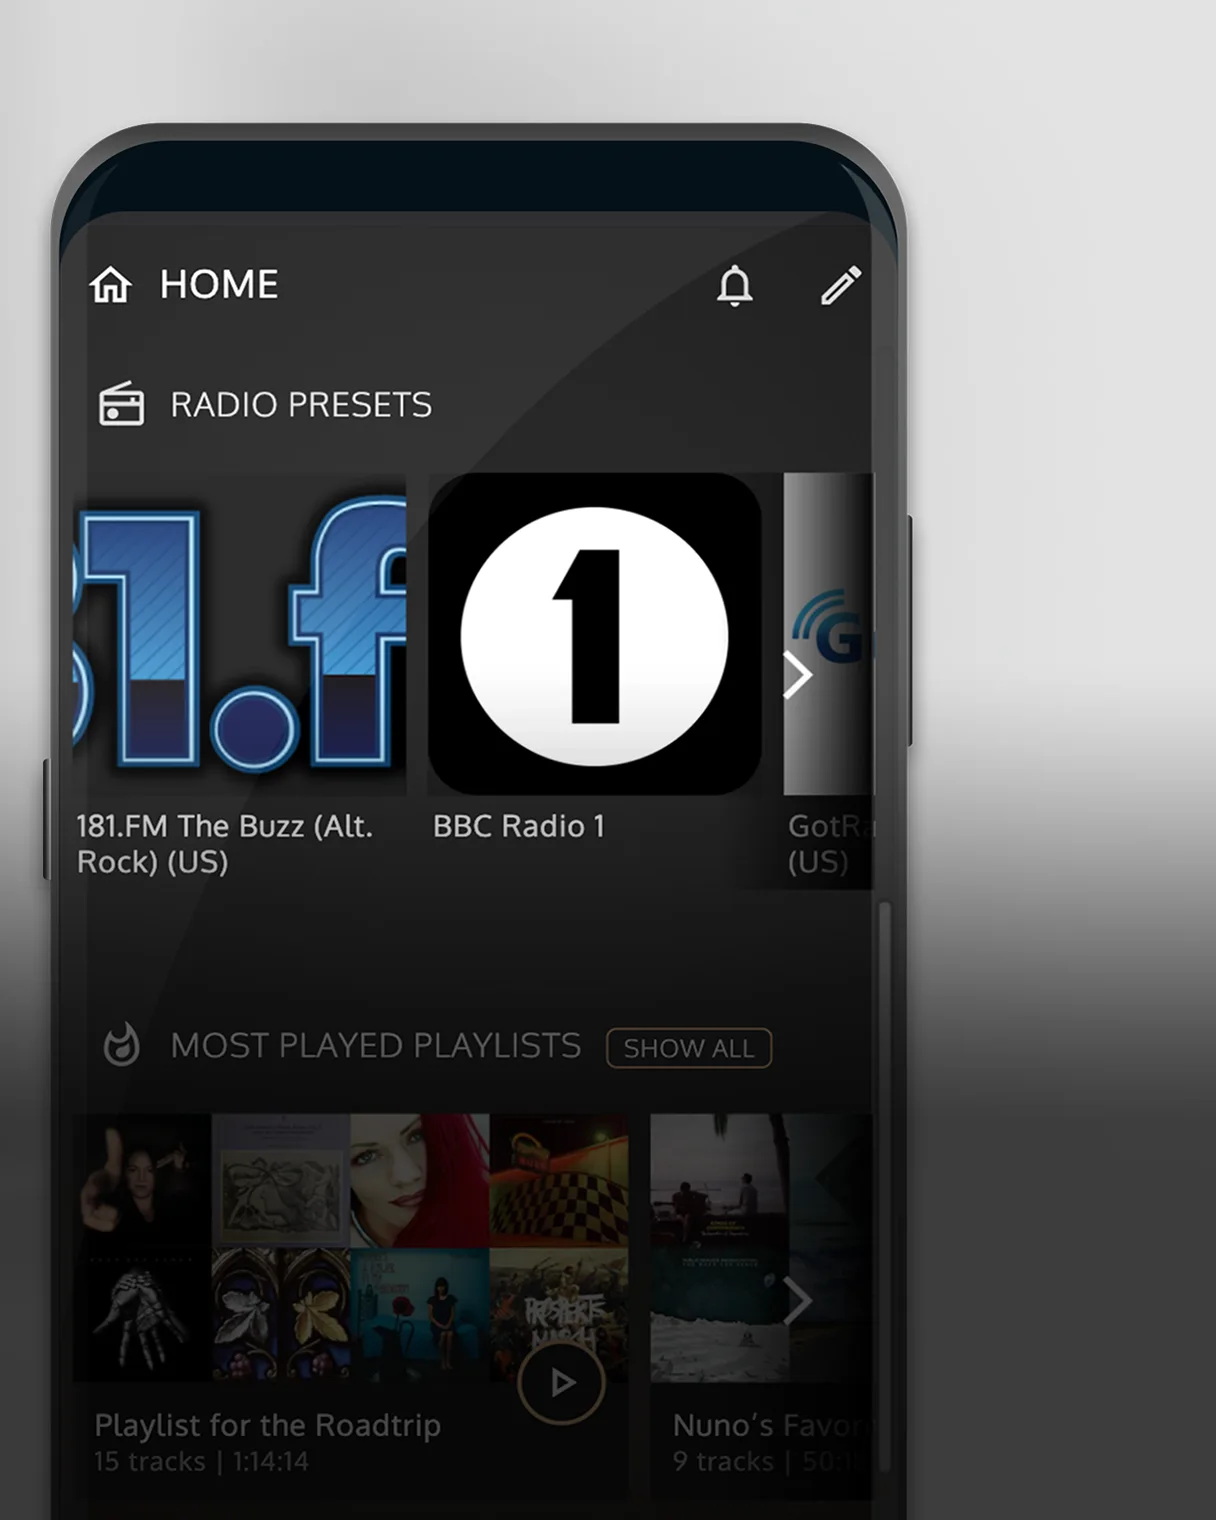 Seamless across local, streaming and internet radio